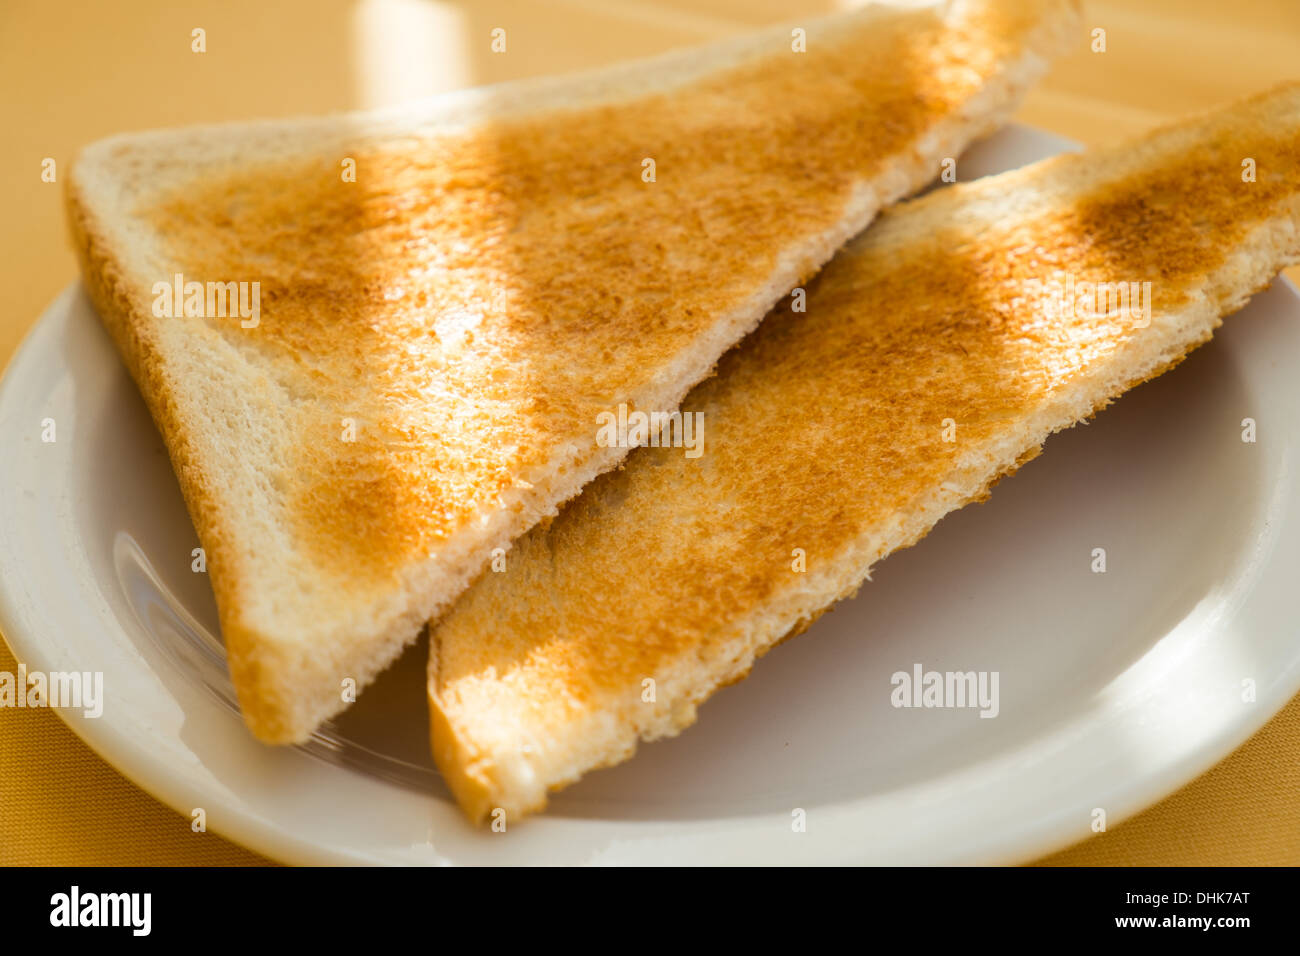 Two slices of white toast sitting on a white plate with rays of sun across them. Stock Photo